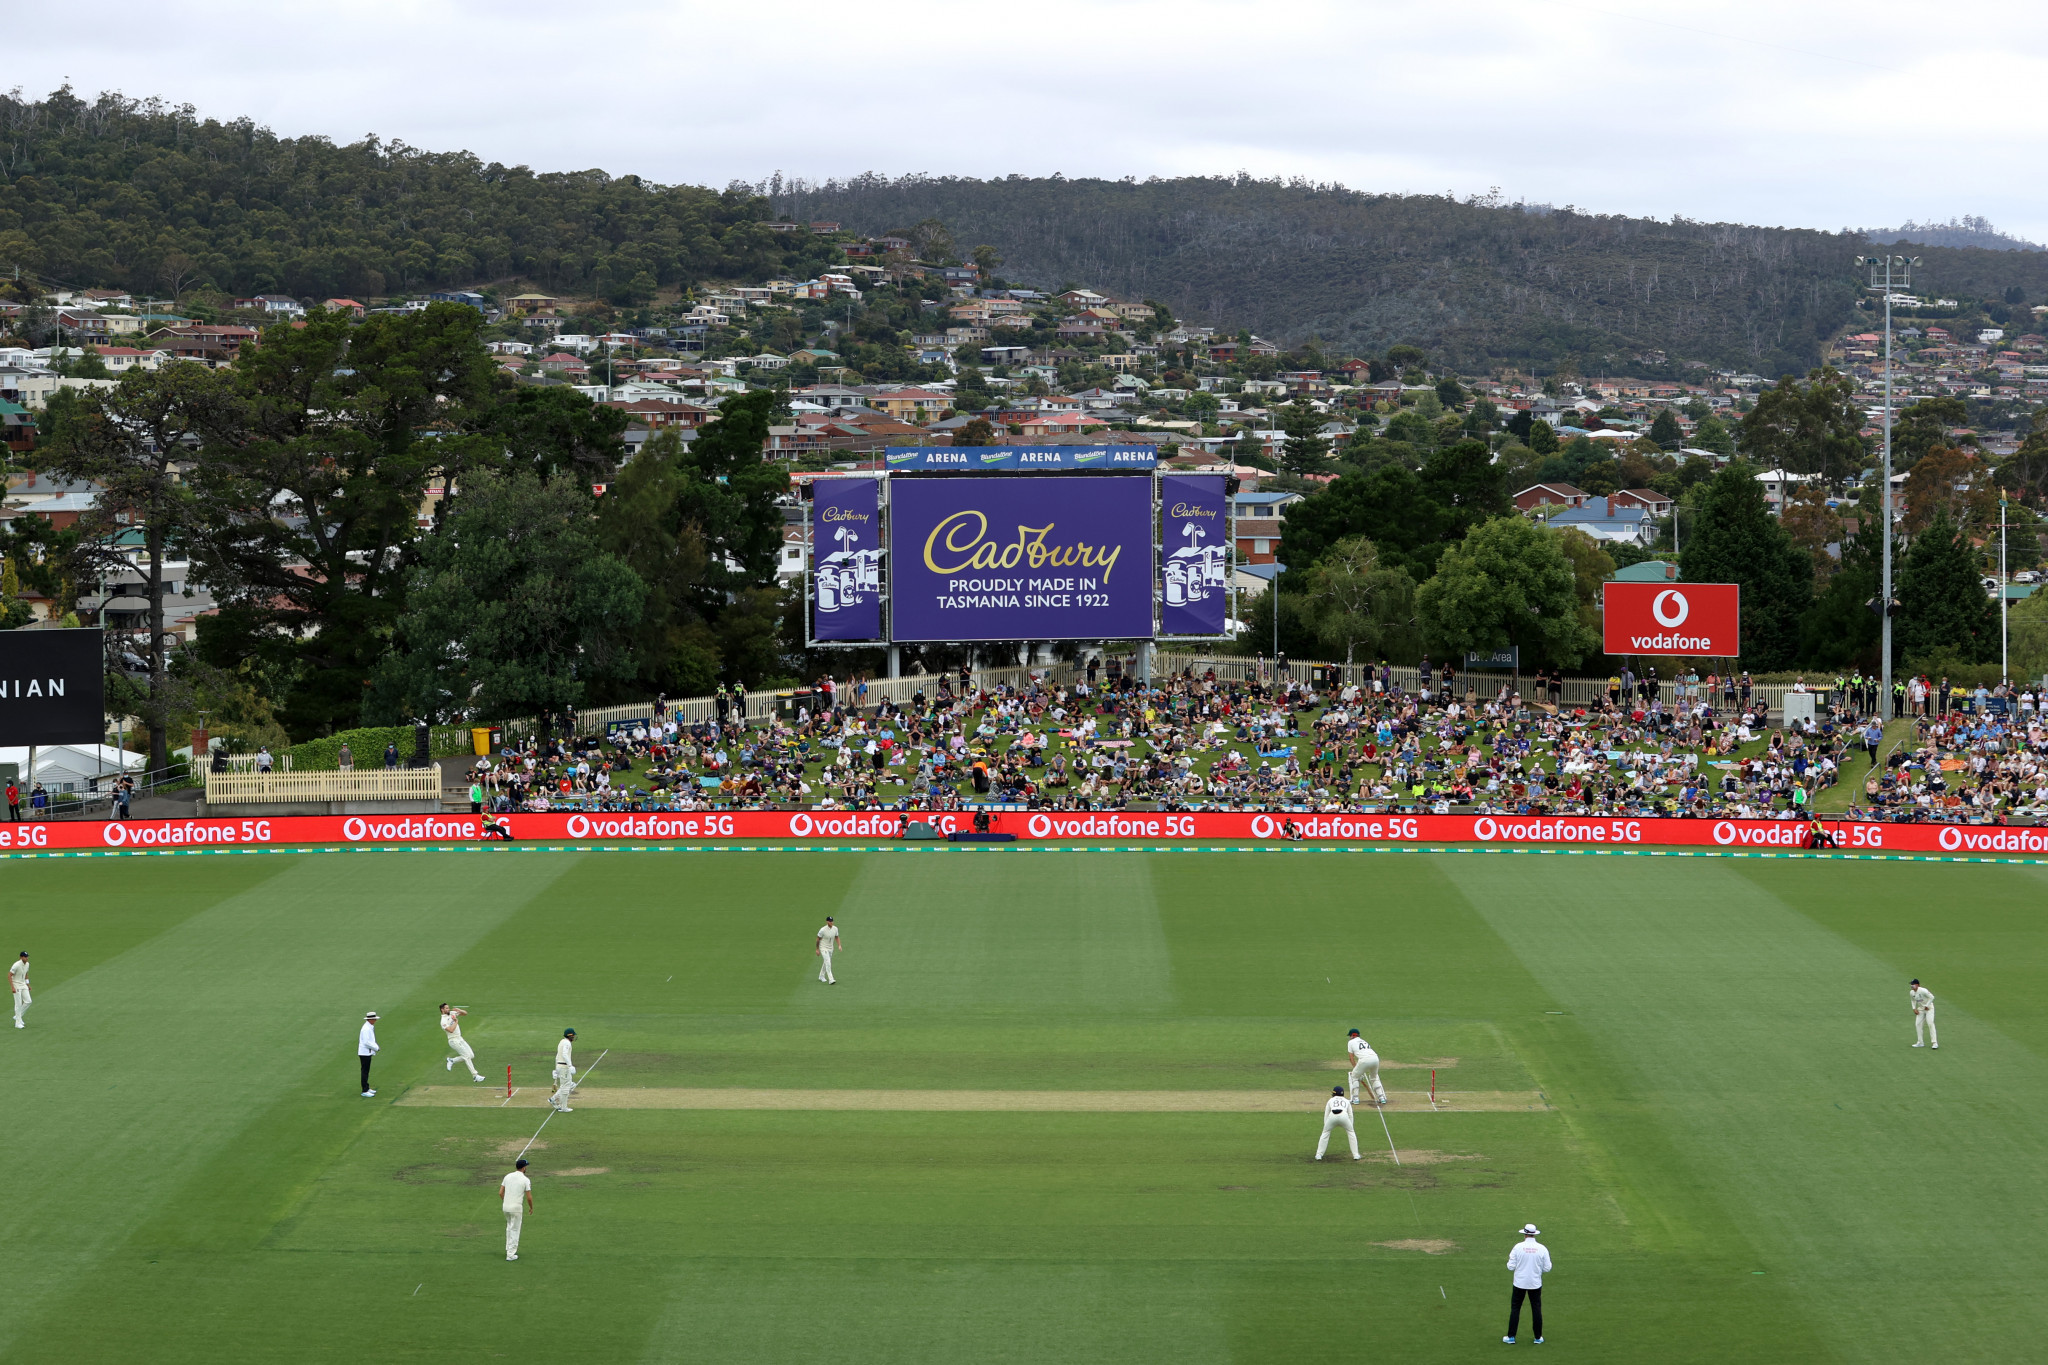 Tasmania's state capital Hobart hosted its first Ashes Test match between Australia and England earlier this year ©Getty Images